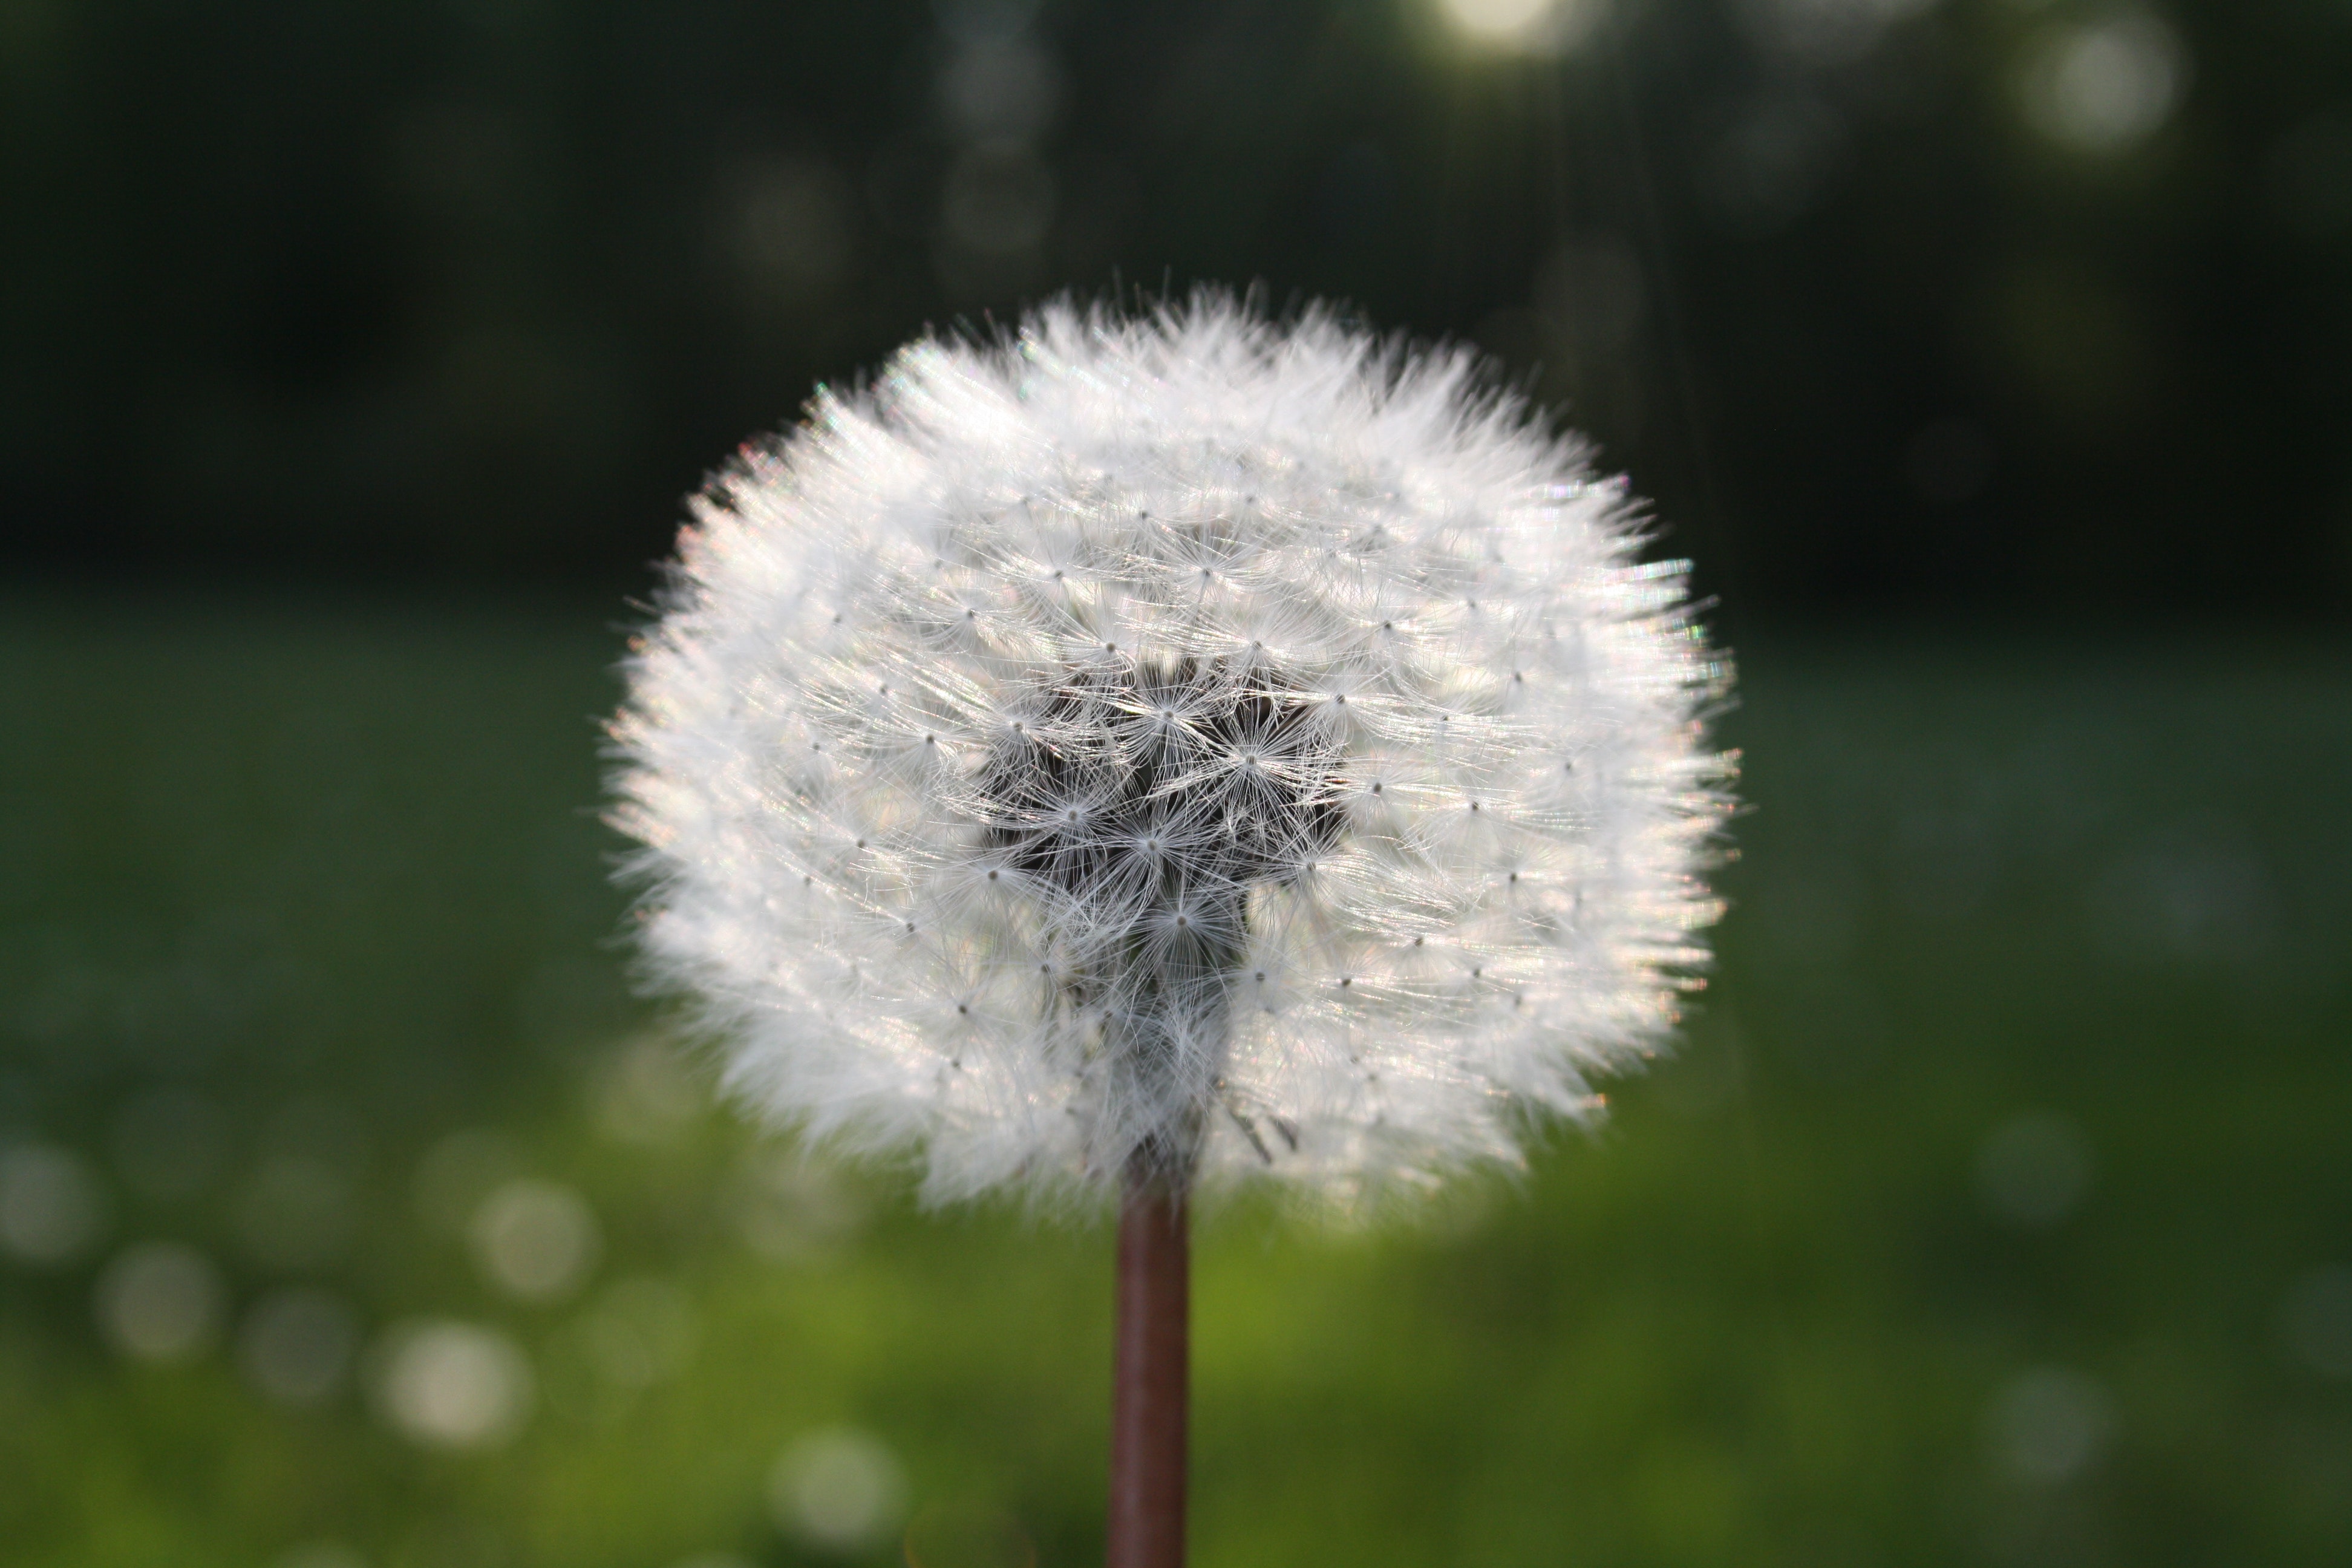 White Dandelion Flower in Close Up Photograph · Free Stock Photo